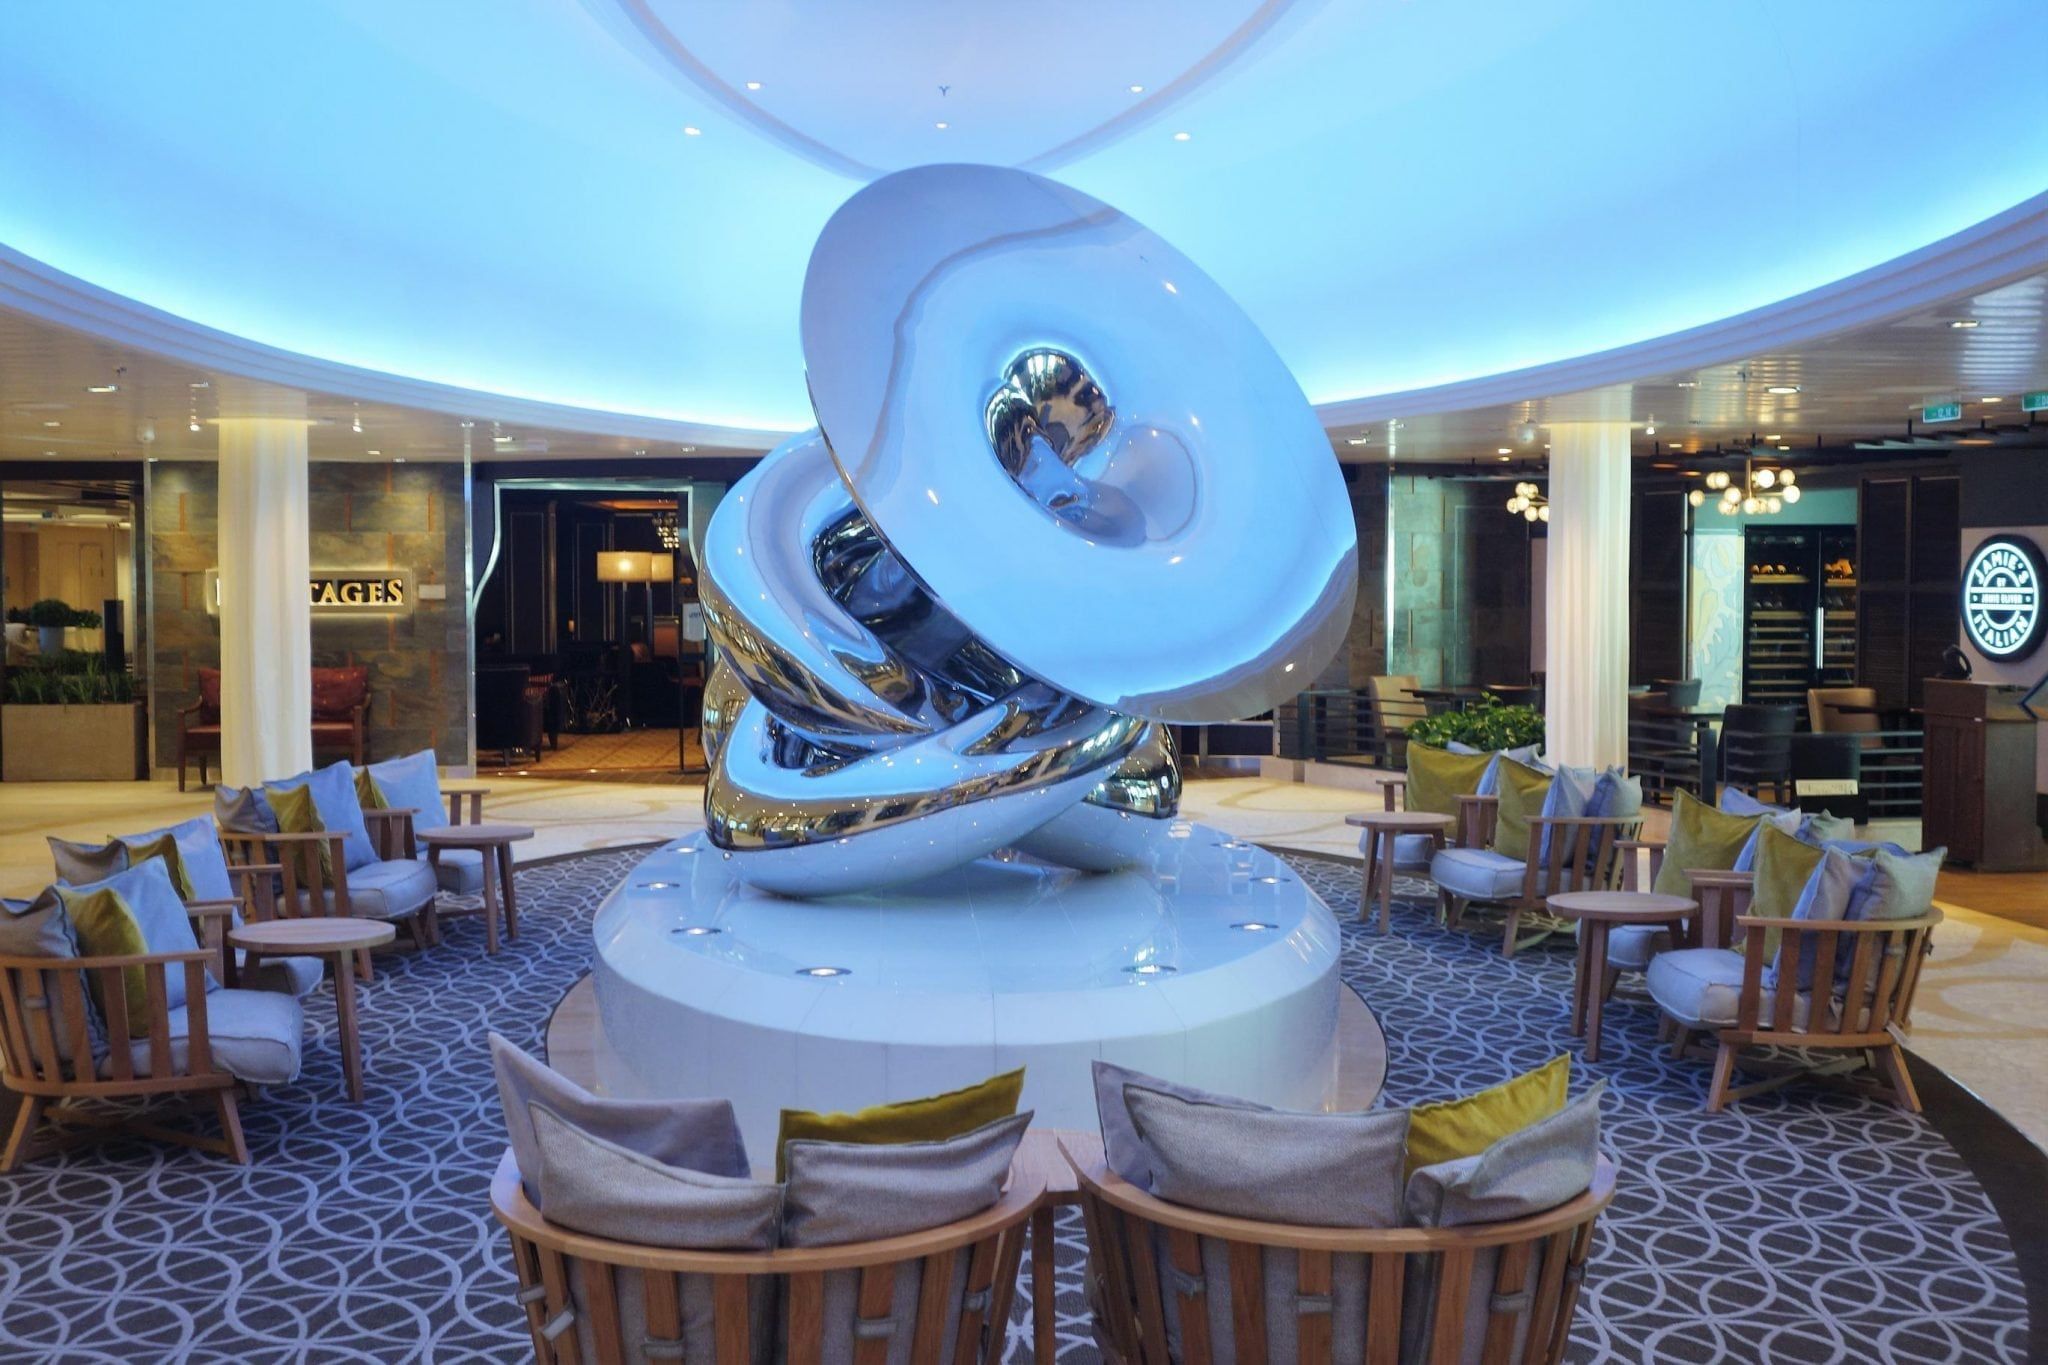 Anthem of the Seas Art Collection